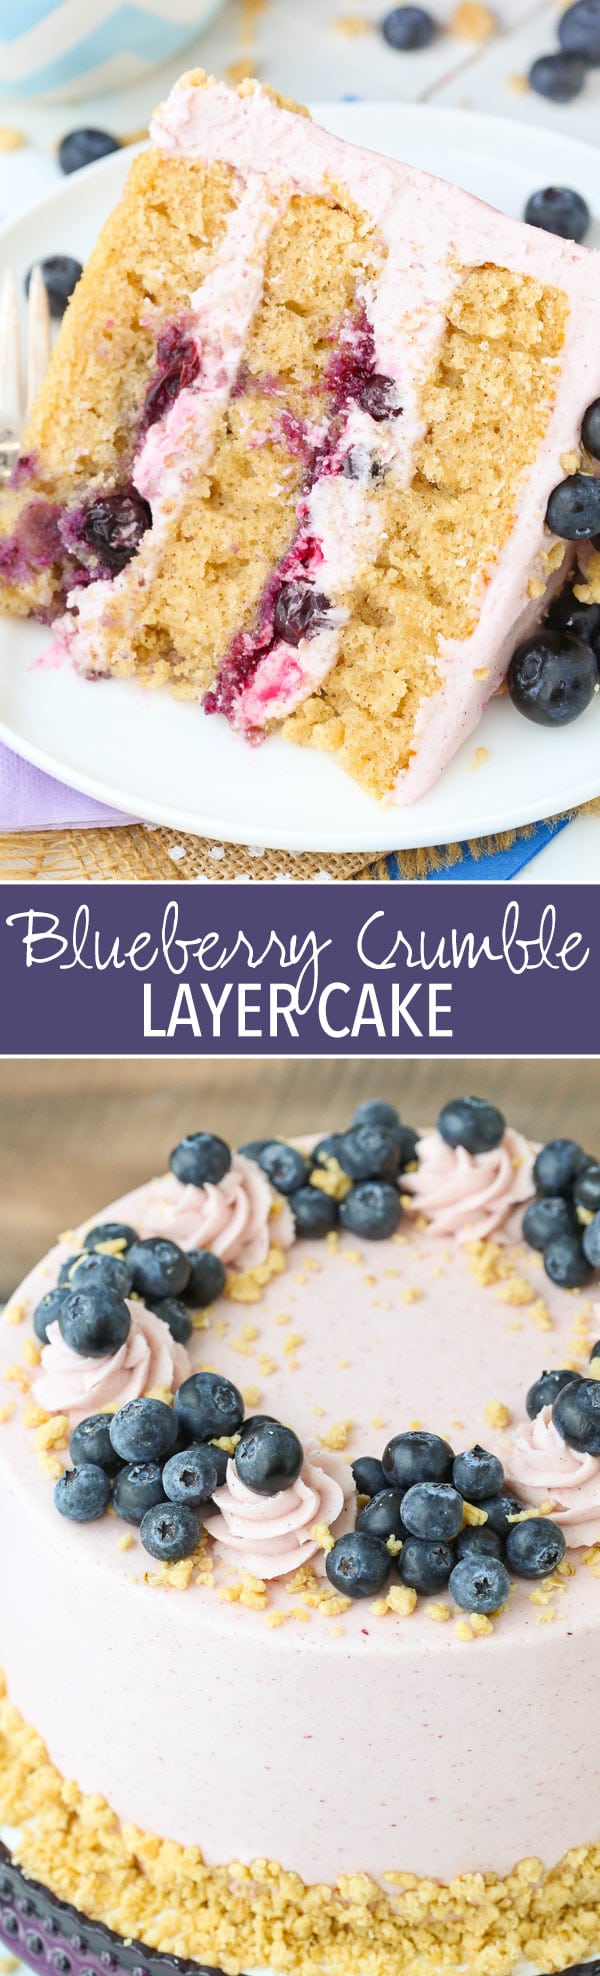 Blueberry Crumble Layer Cake - layers of cinnamon brown sugar cake, blueberry filling and frosting, and a little crumble! Like a pie in cake form! 